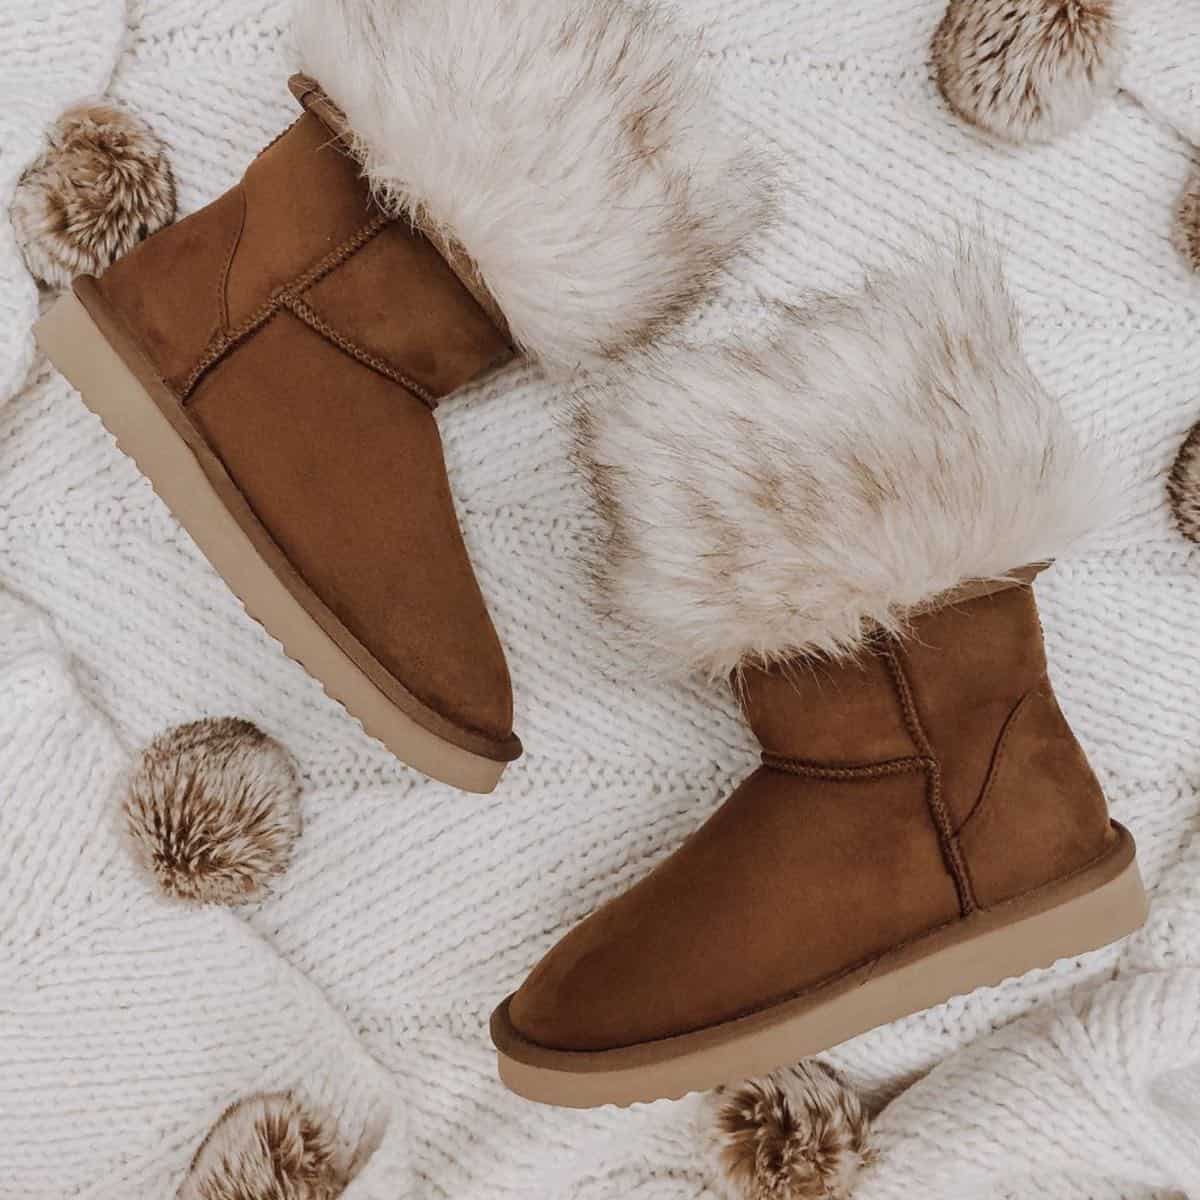 pastel Airco Vol Vegan Uggs (Best Cruelty-Free Ugg Boots + Slippers)